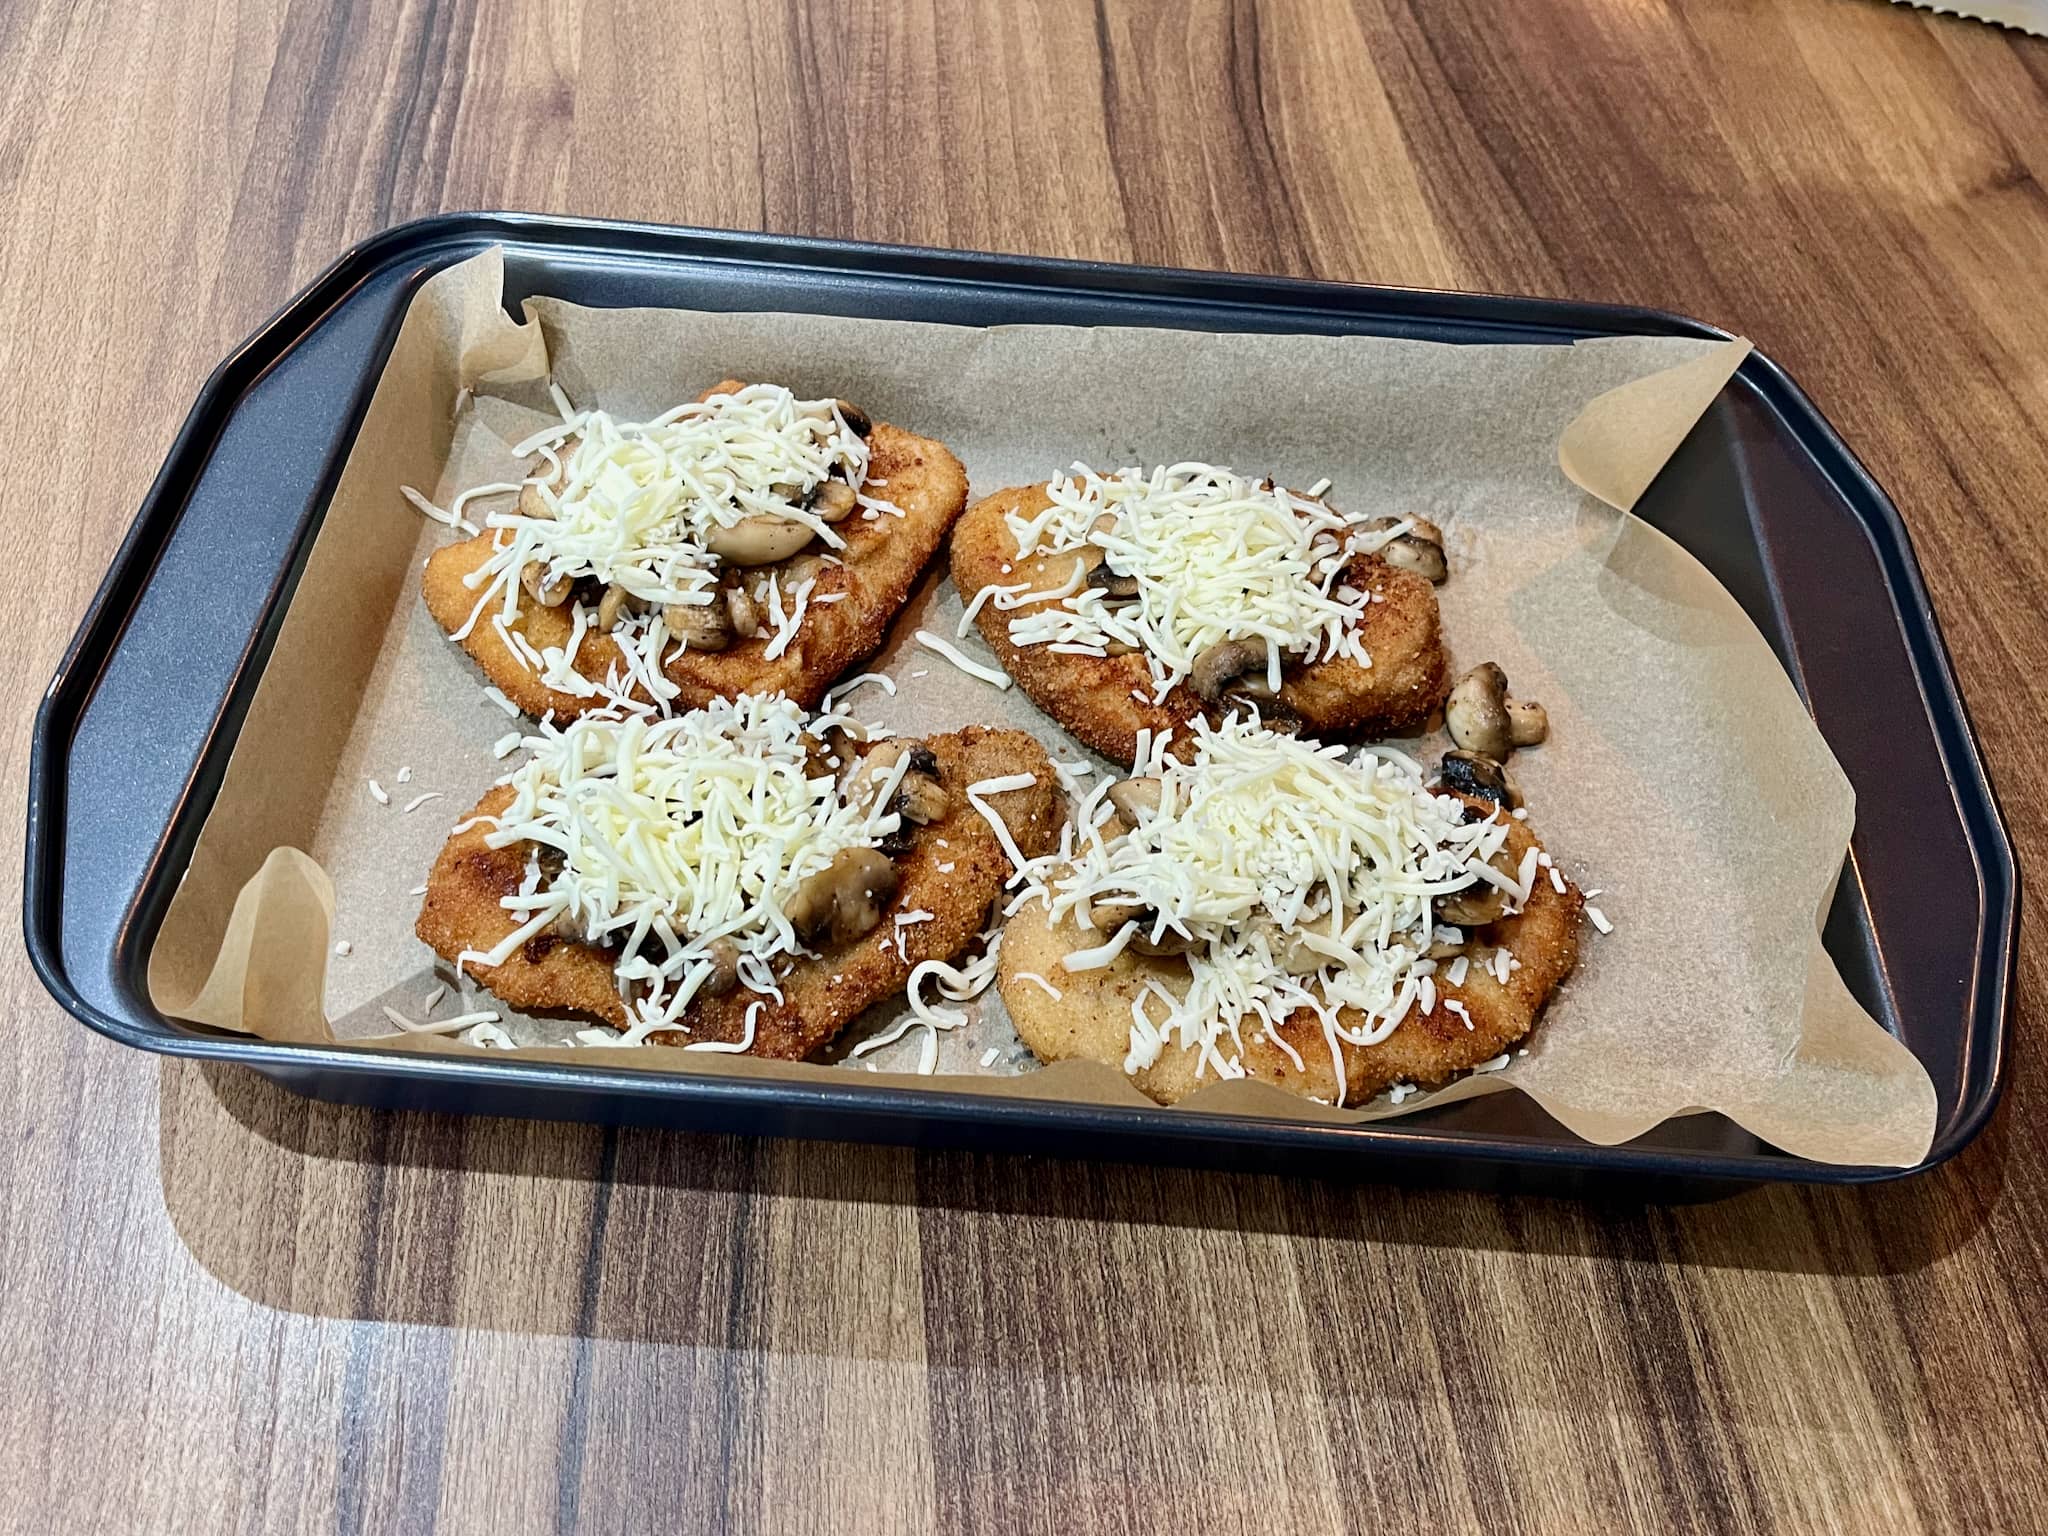 Pork lions with mushrooms and cheese